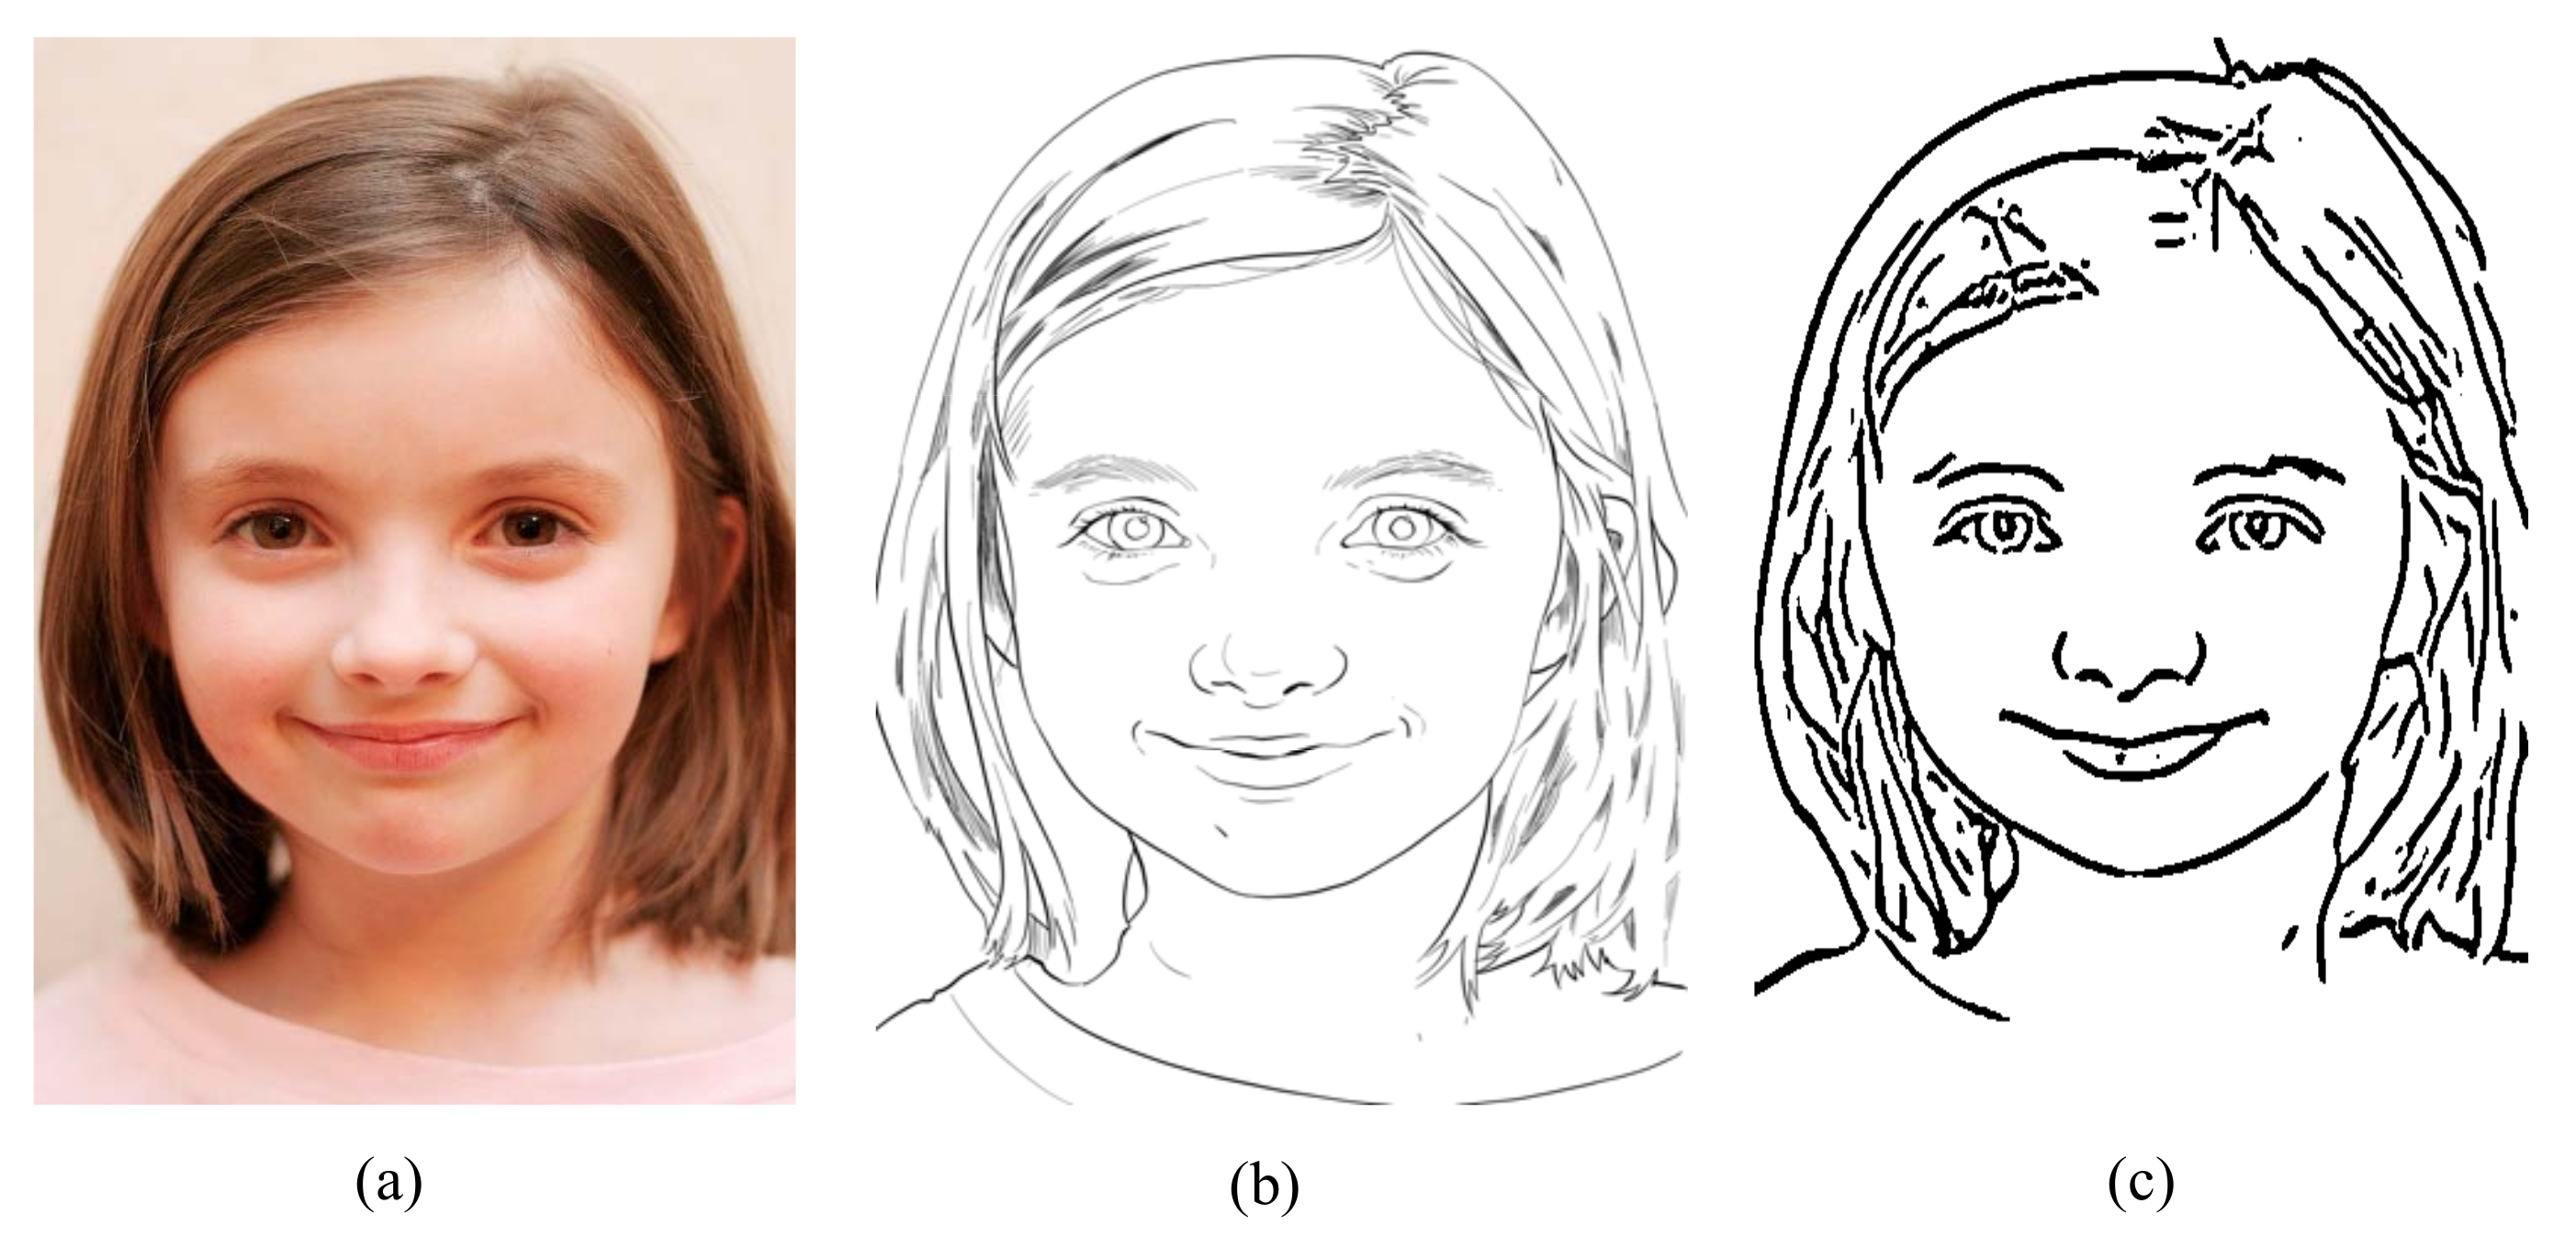 How to Draw a Child's Face